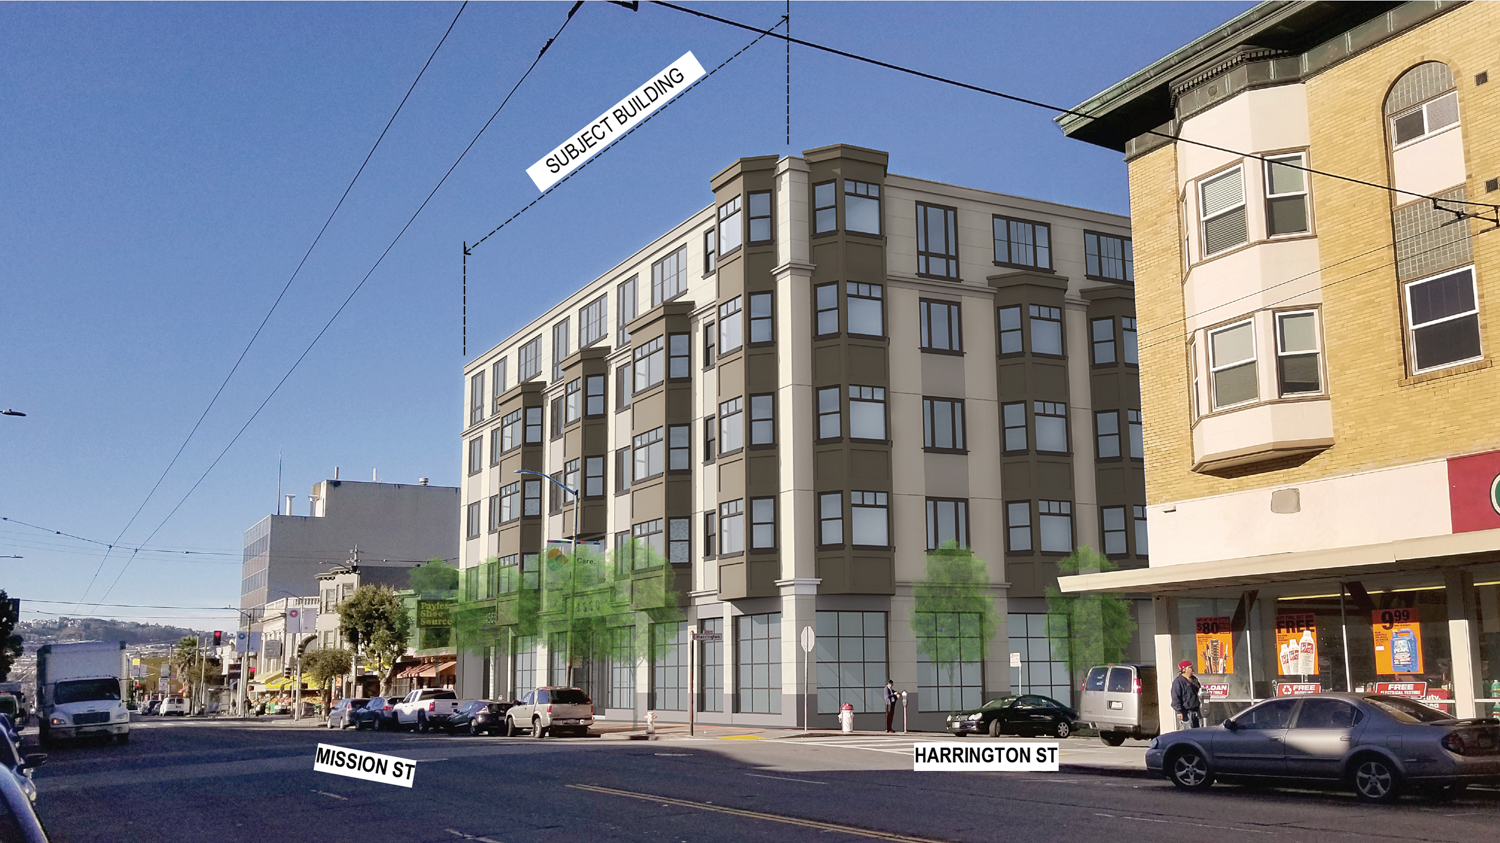 4550 Mission Street from previous proposal, design by Schaub Ly Architects